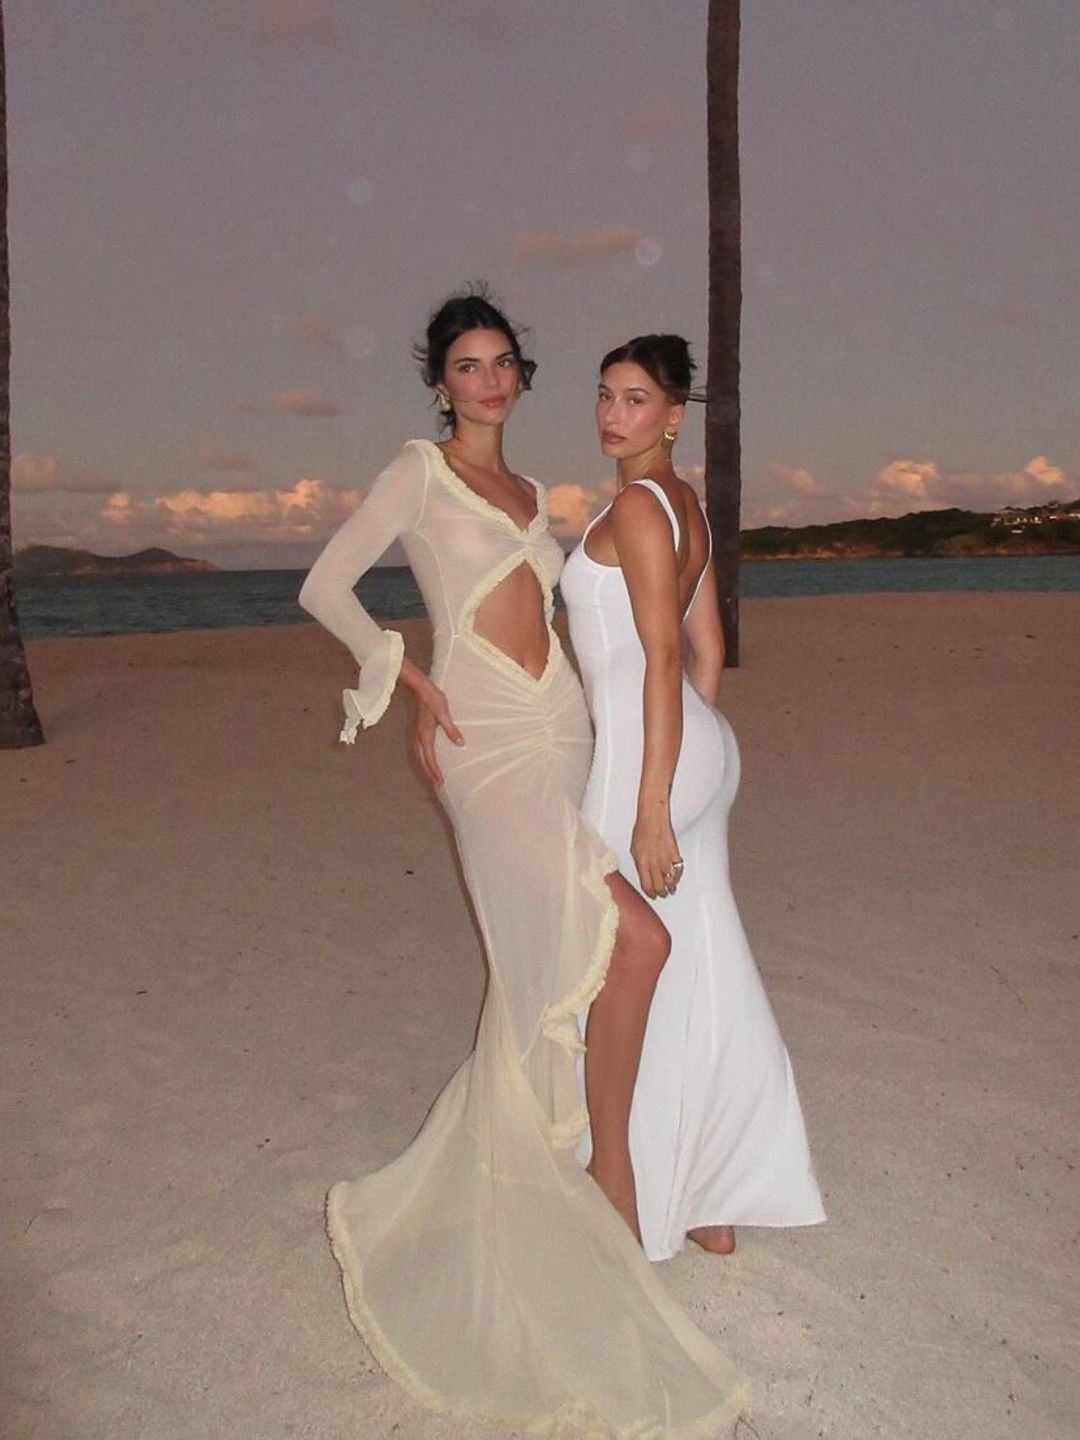 Hailey Bieber and Kendall Jenner pose on a sandy beach in matching cream and white gowns